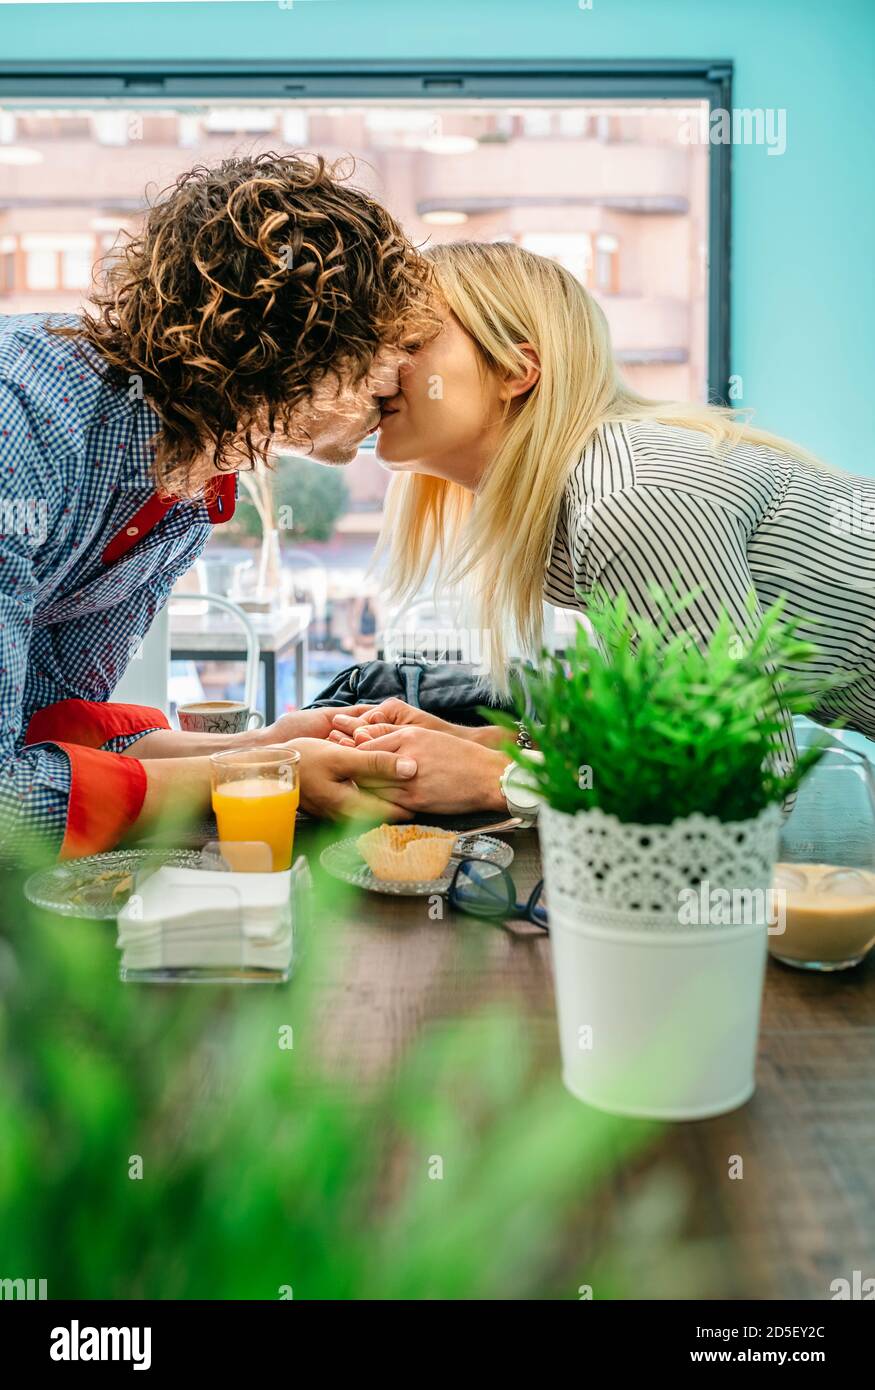 Couple kissing in a cafe Stock Photo